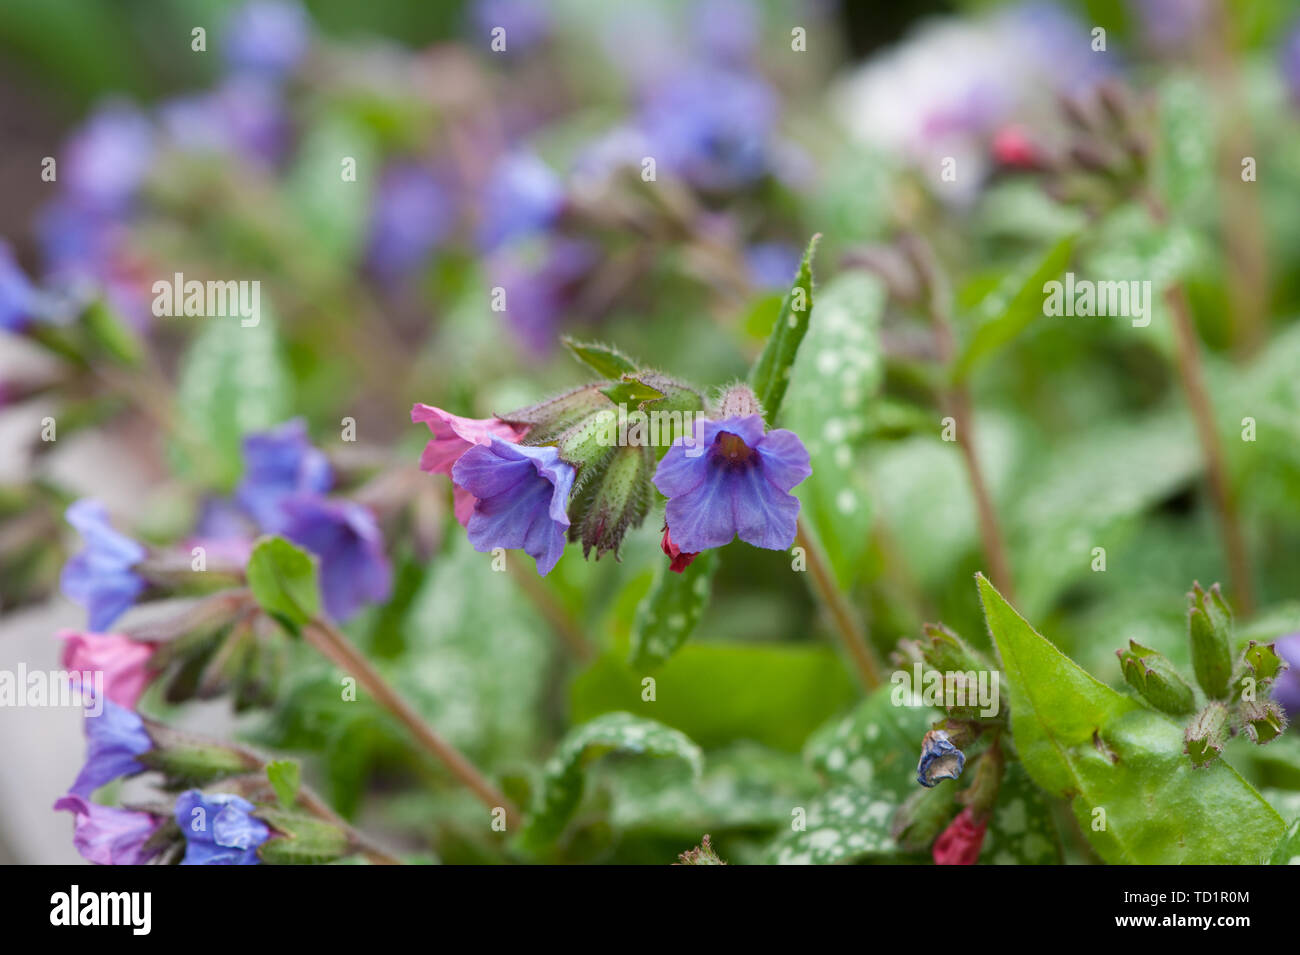 Lungwort Flowers (Pulmonaria Officinalis). Violet Lungwort flowers (also known as Our Lady's Milk Drops or Common Lungwort) close-up Stock Photo